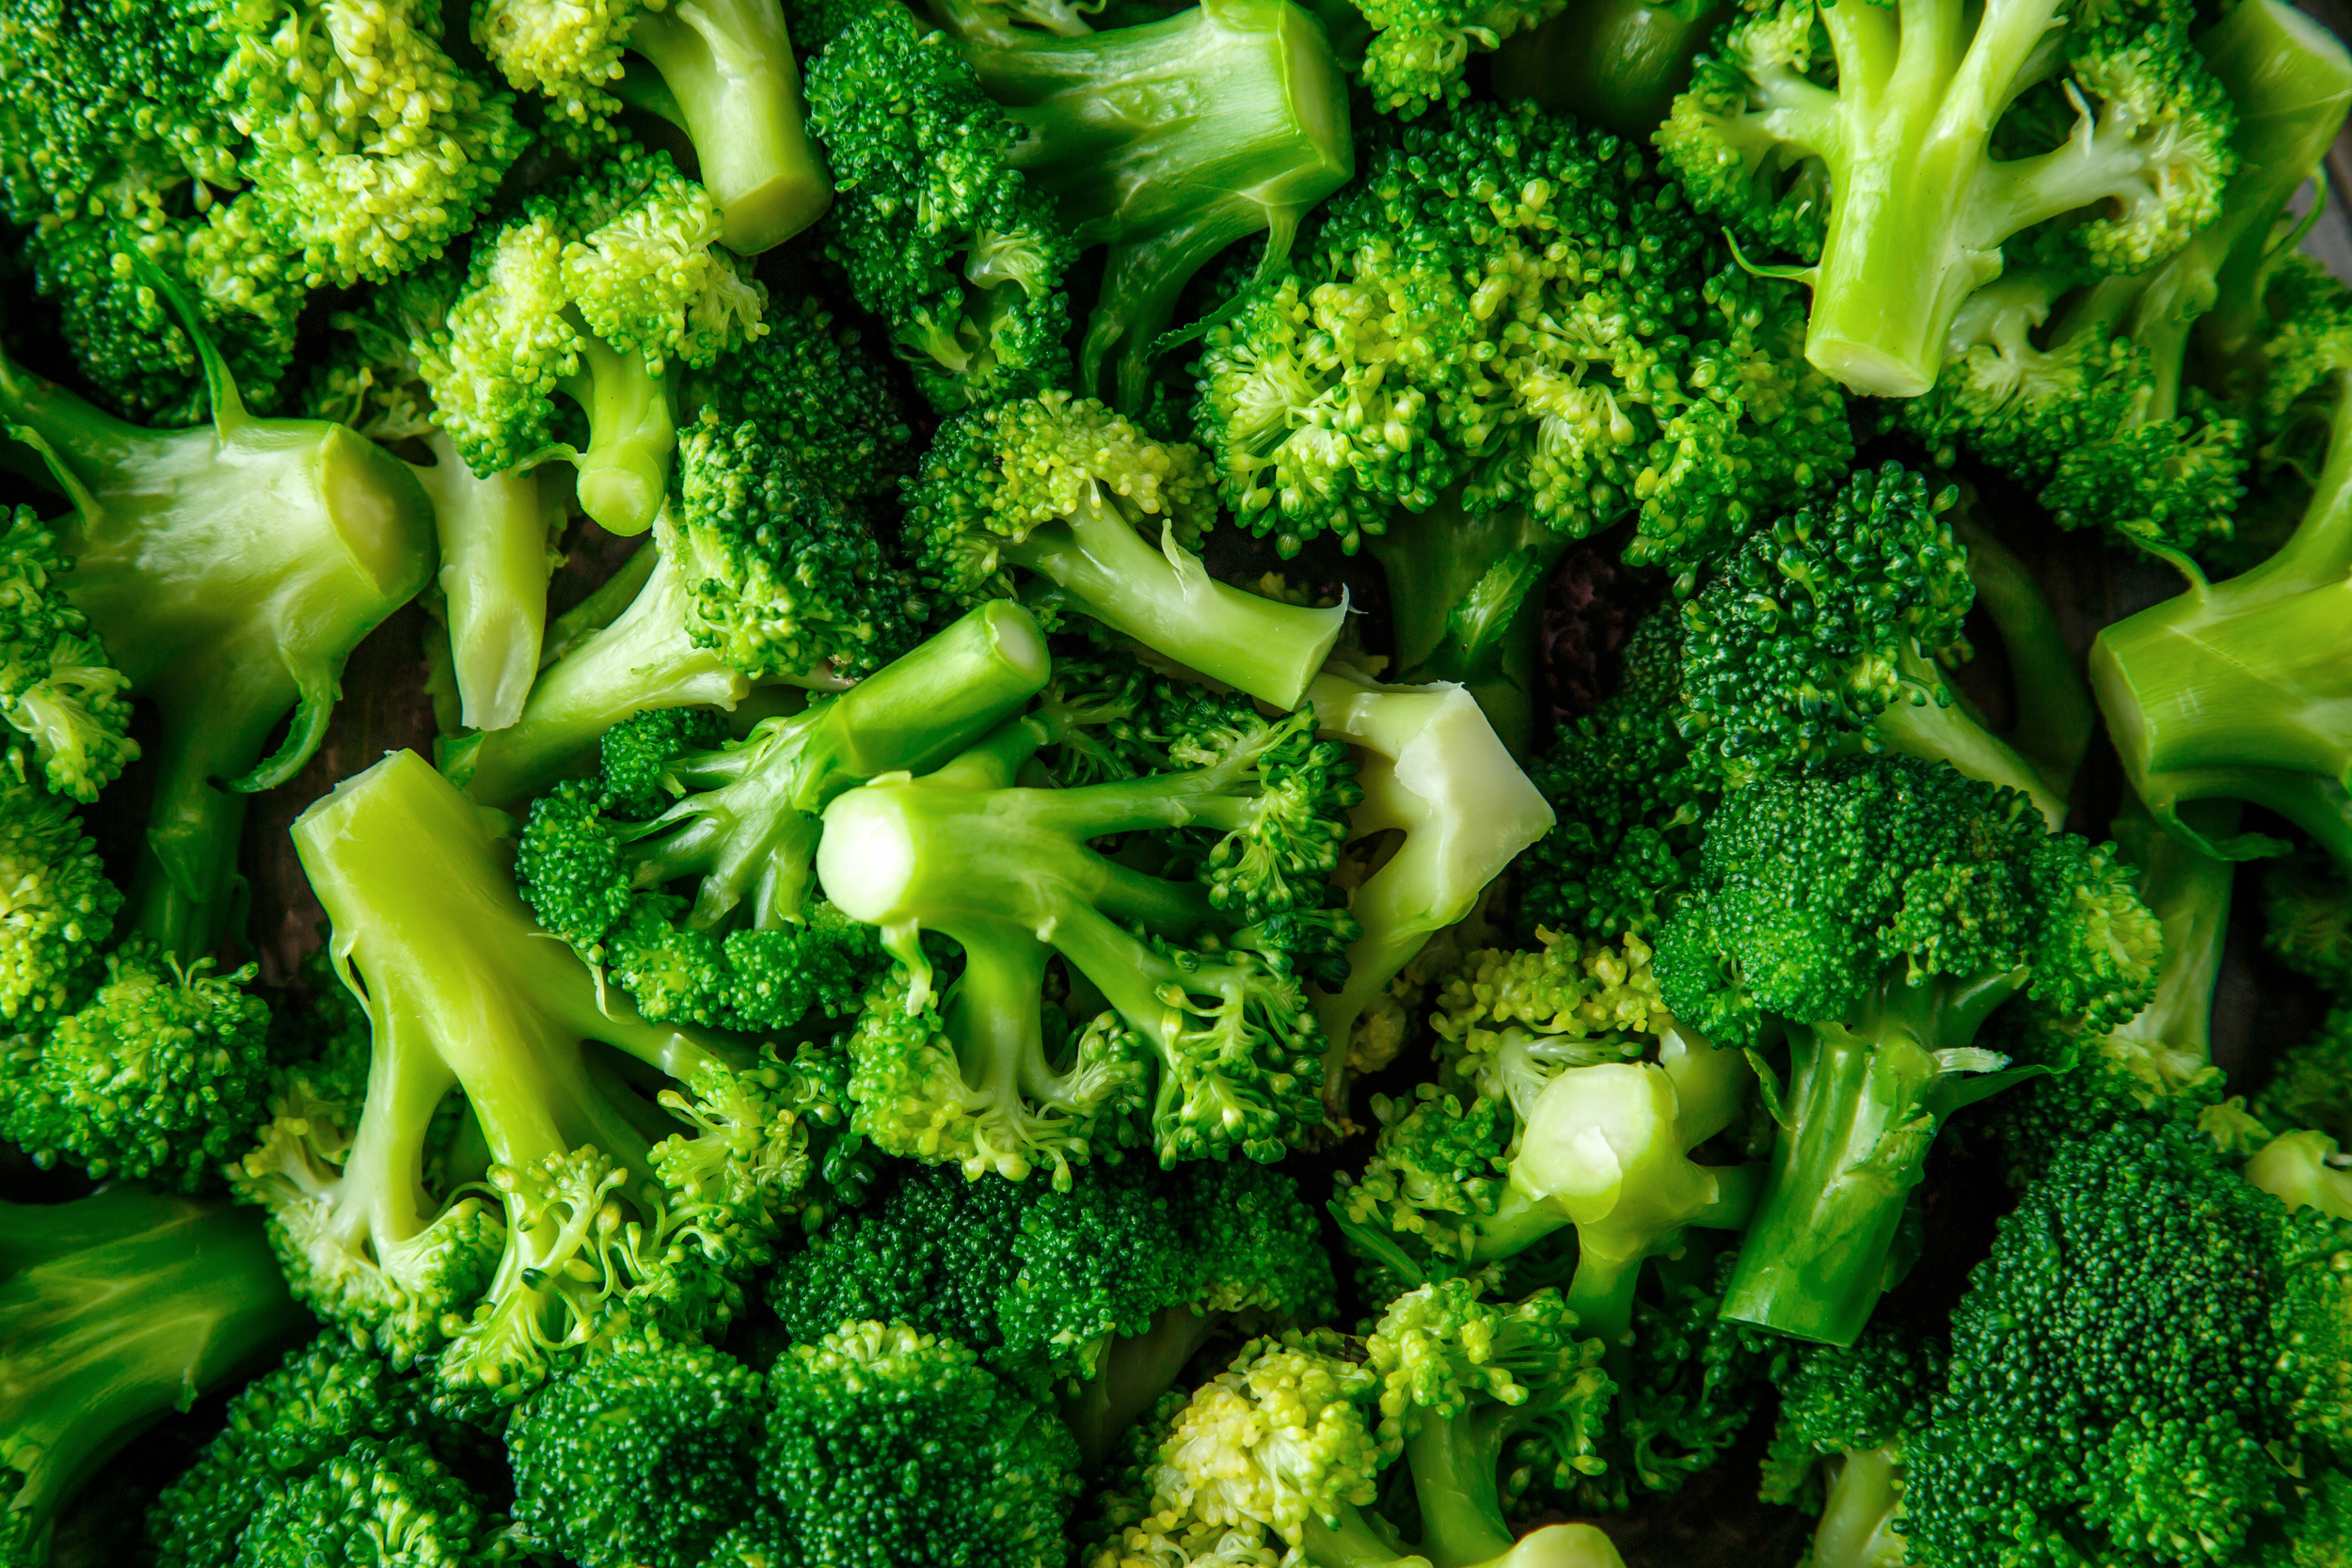 <p>Based on the spelling of broccoli, you could easily guess that it had non-Anglo origins. Broccoli is the plural of the word derived from broccolo, which means “flowering on top of the cabbage.” This is an accurate name, as broccoli is essentially an edible flower.</p><p>You may also like: <a href='https://www.yardbarker.com/lifestyle/articles/20_foods_that_are_basically_calorie_free_112723/s1__39105893'>20 foods that are basically calorie-free</a></p>